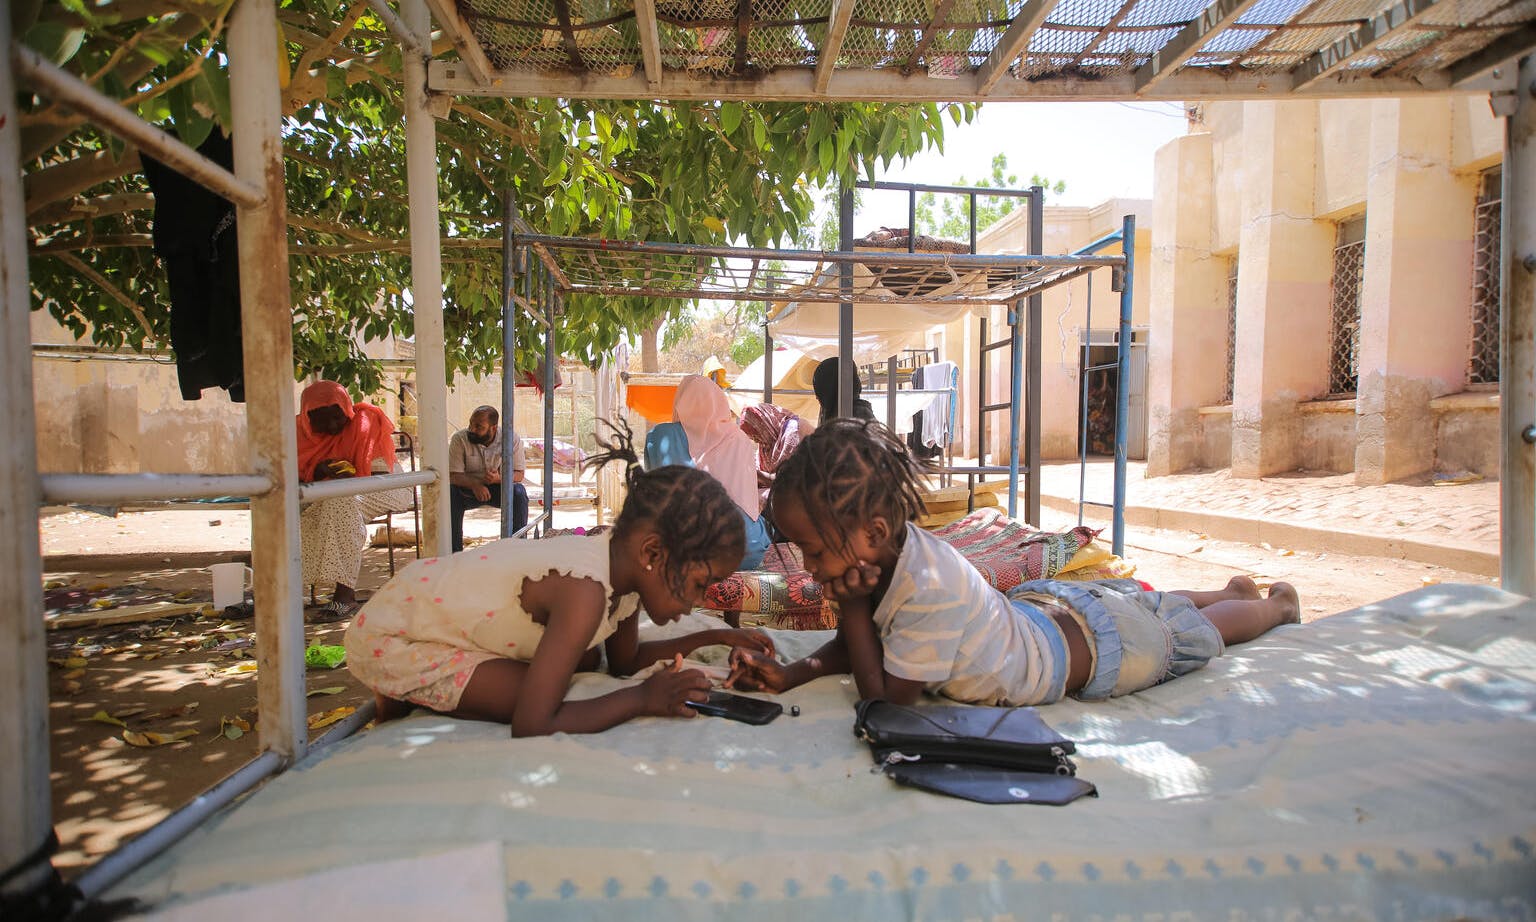 Displaced children play games on a mobile phone at a temporary shelter, following continued fighting that broke out in Khartoum on 15 April. Children and their families have fled and sought safety in neighbouring safer states.